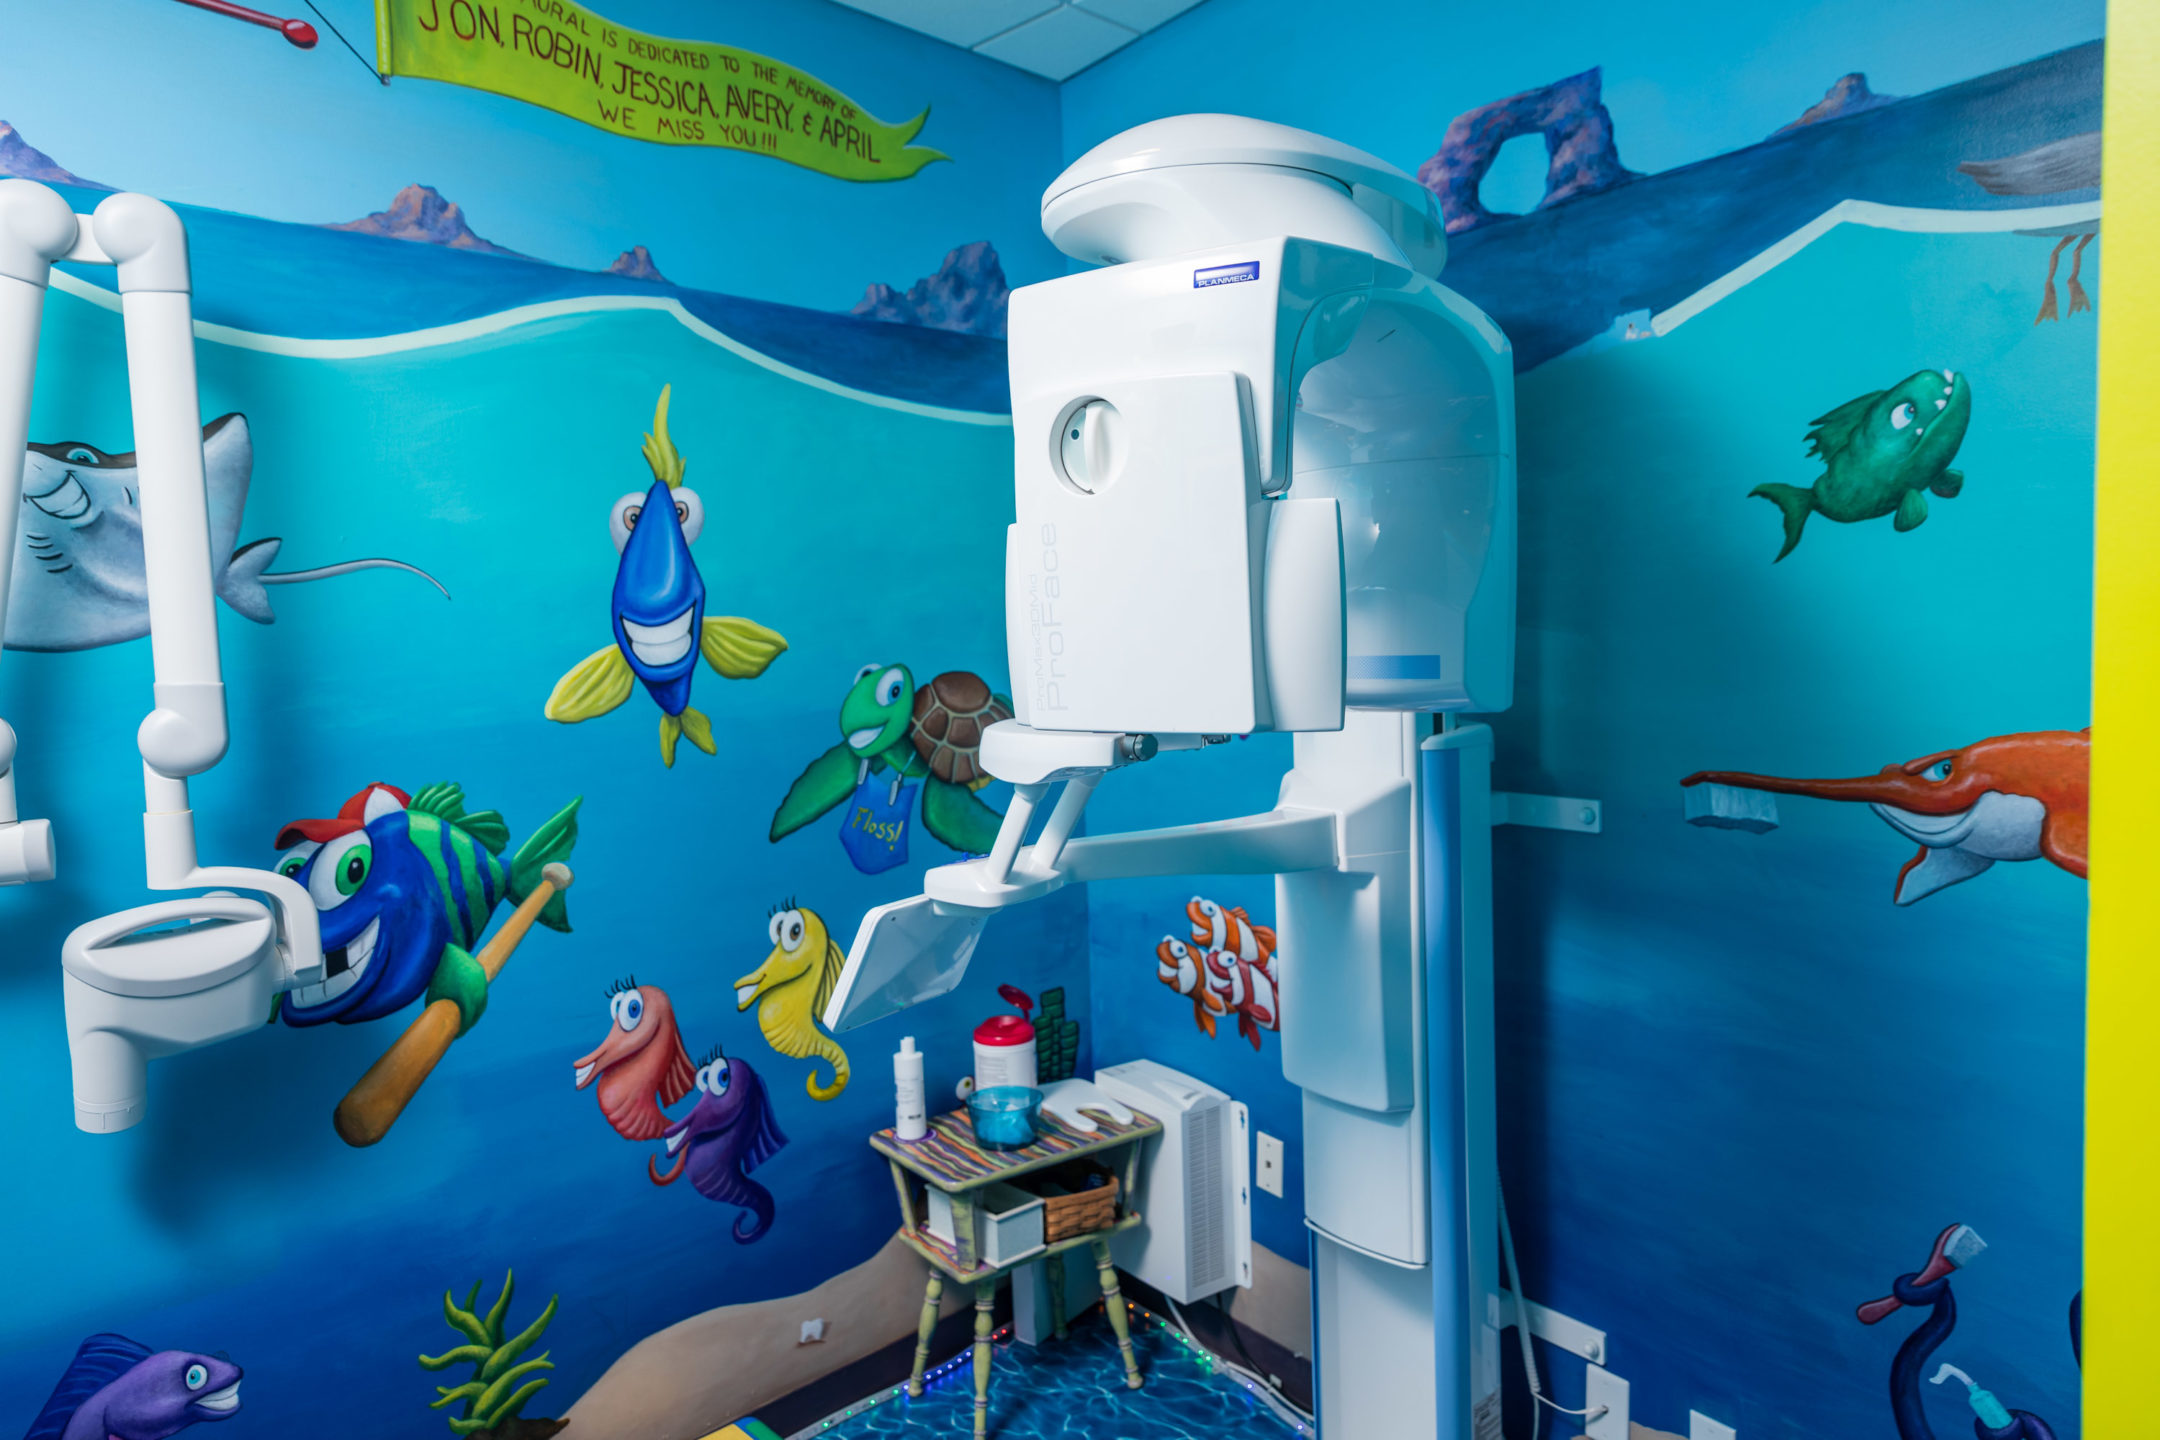  A dental exam room is brightly colored and decorated with fish in an underwater scene. 